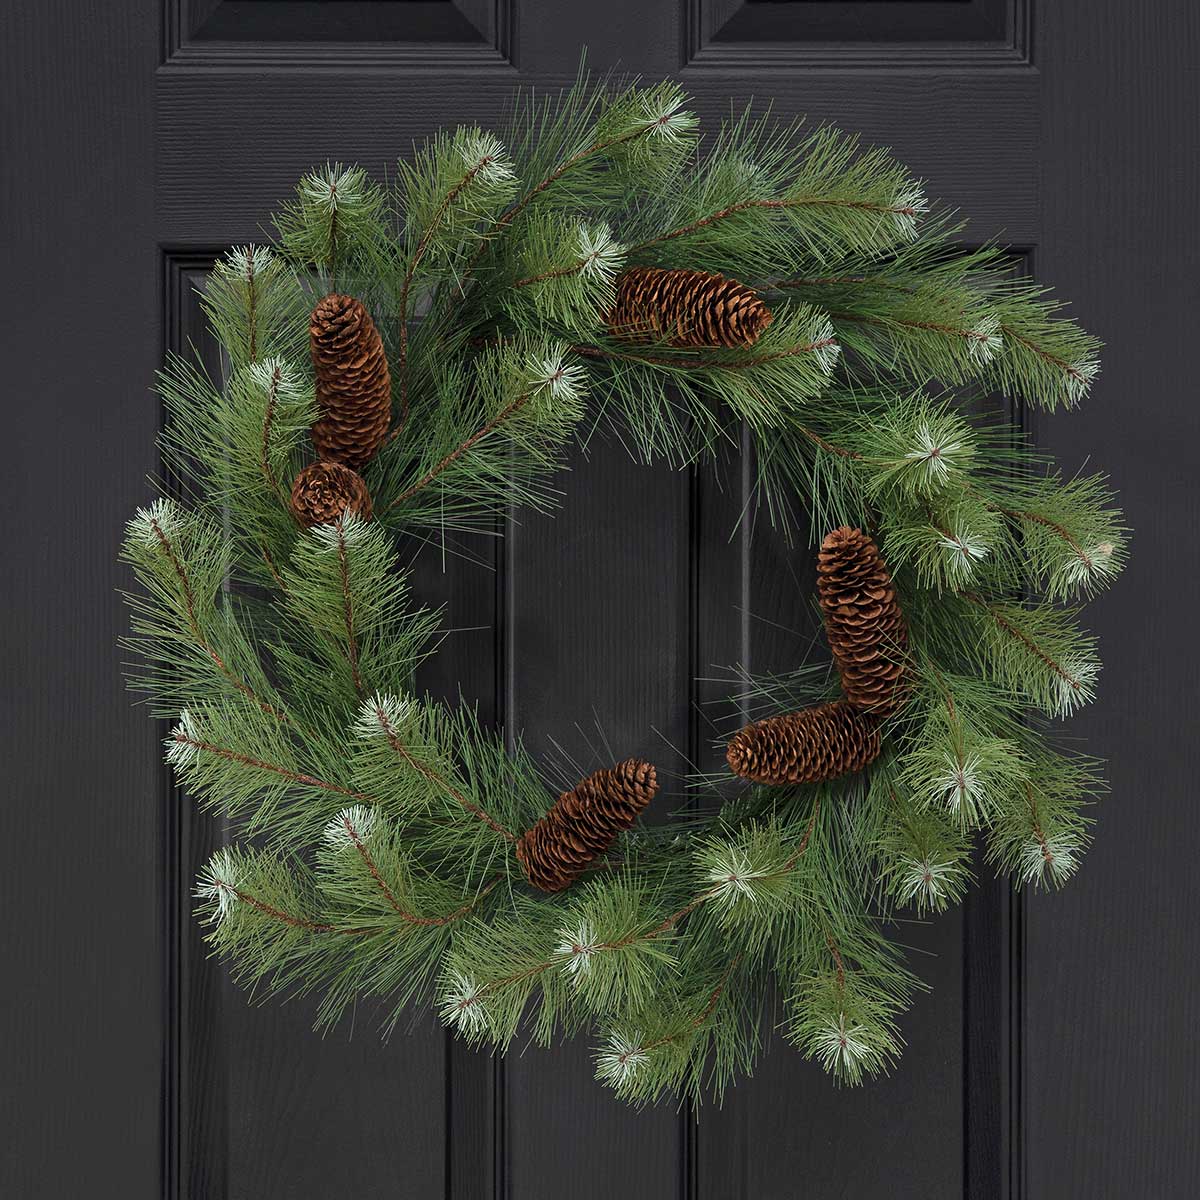 WREATH ROCKY MOUNTAIN PINE 26IN (INNER RING 12.5IN) - Click Image to Close